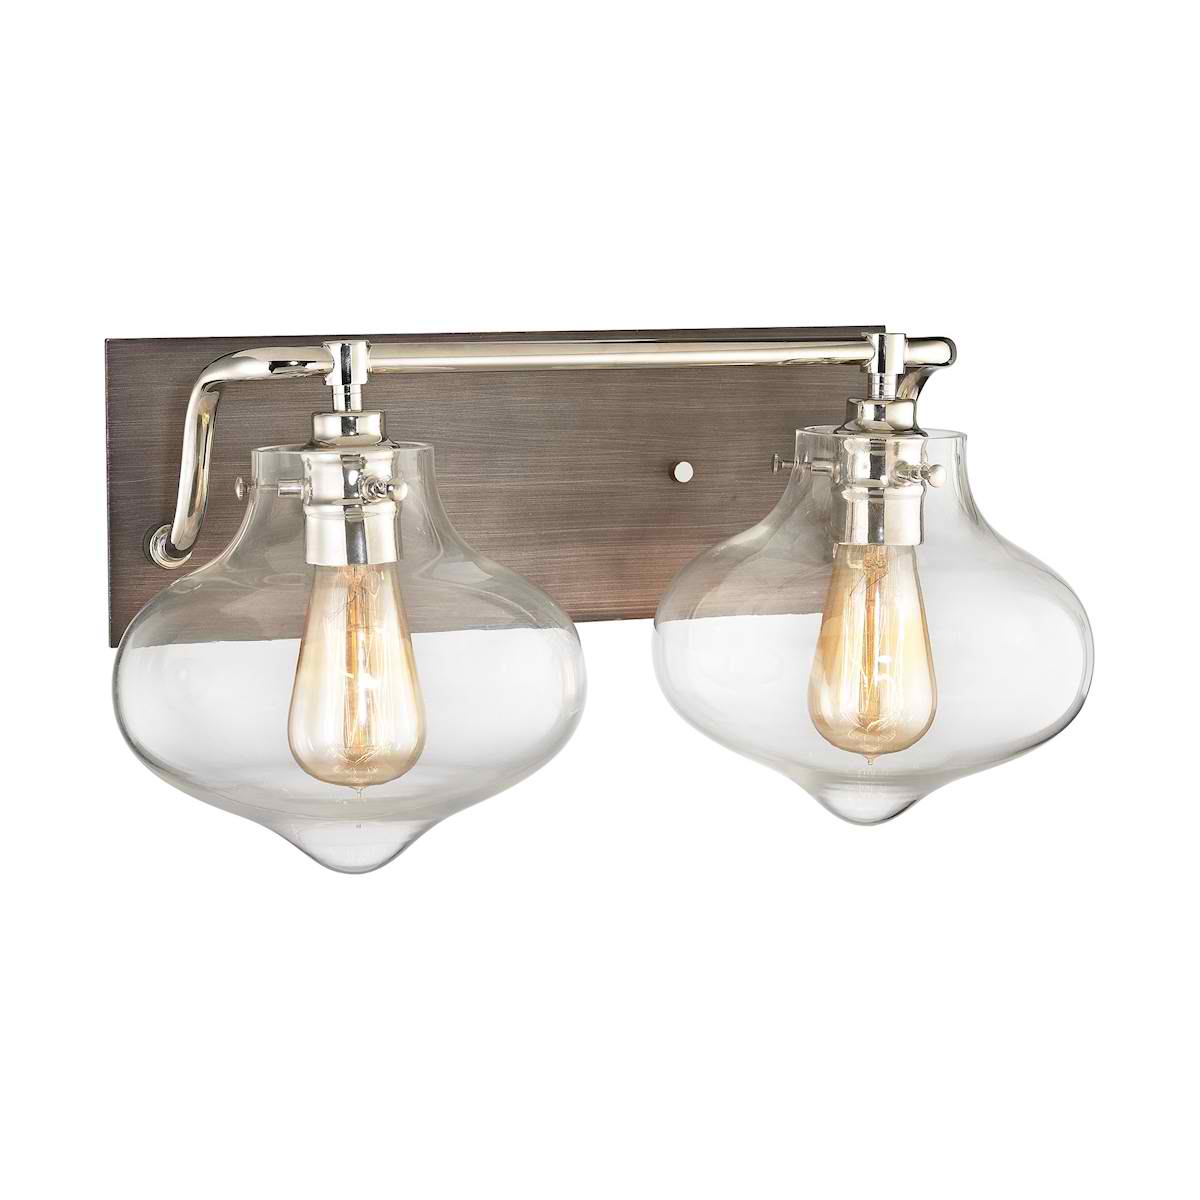 Kelsey 2 Light Vanity in Weathered Zinc with Polished Nickel Accents